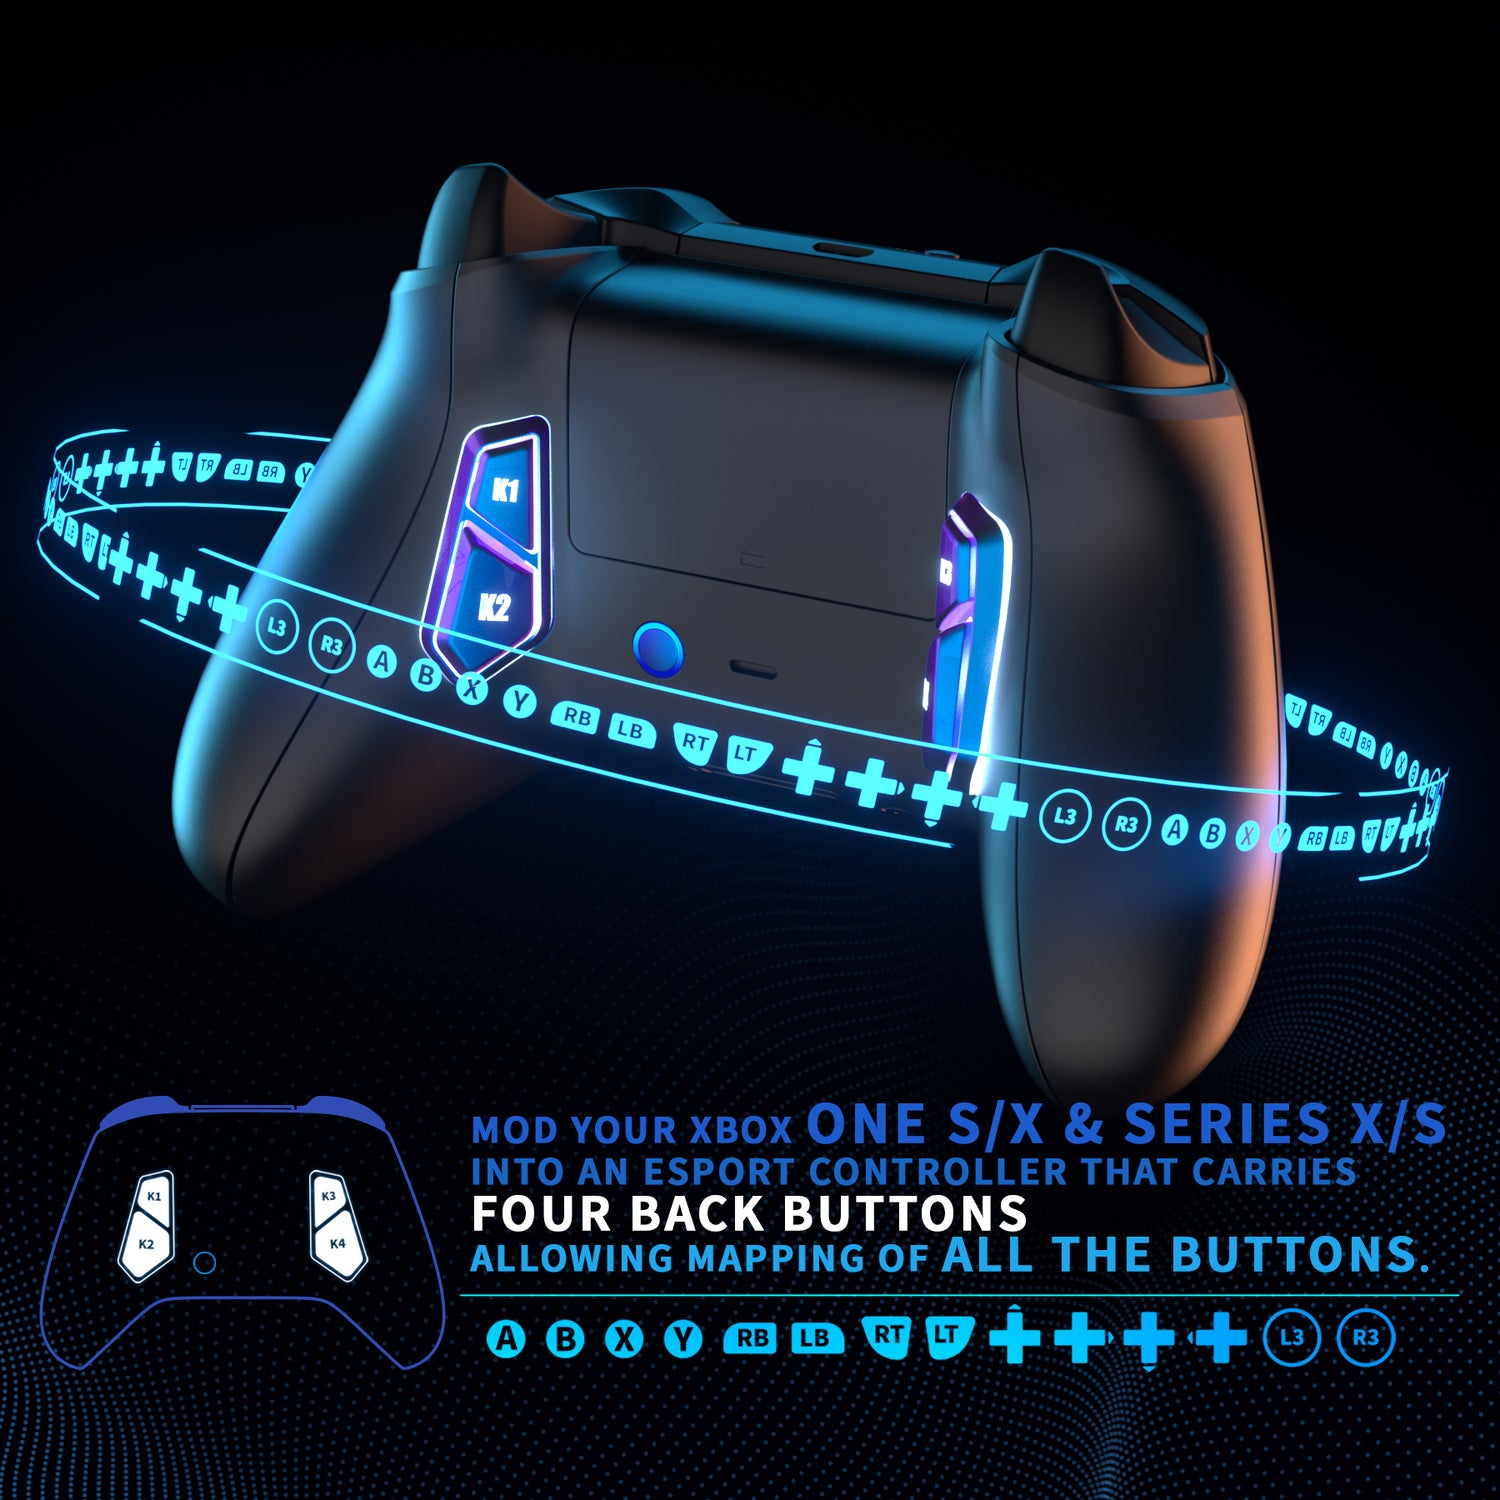 eXtremeRate Retail Redesigned K1 K2 K3 K4 Back Buttons For eXtremerate VICTOR S/X Remap Kit, Compatible With Xbox One S/X & Xbox Series X/S Controller - Chameleon Purple Blue